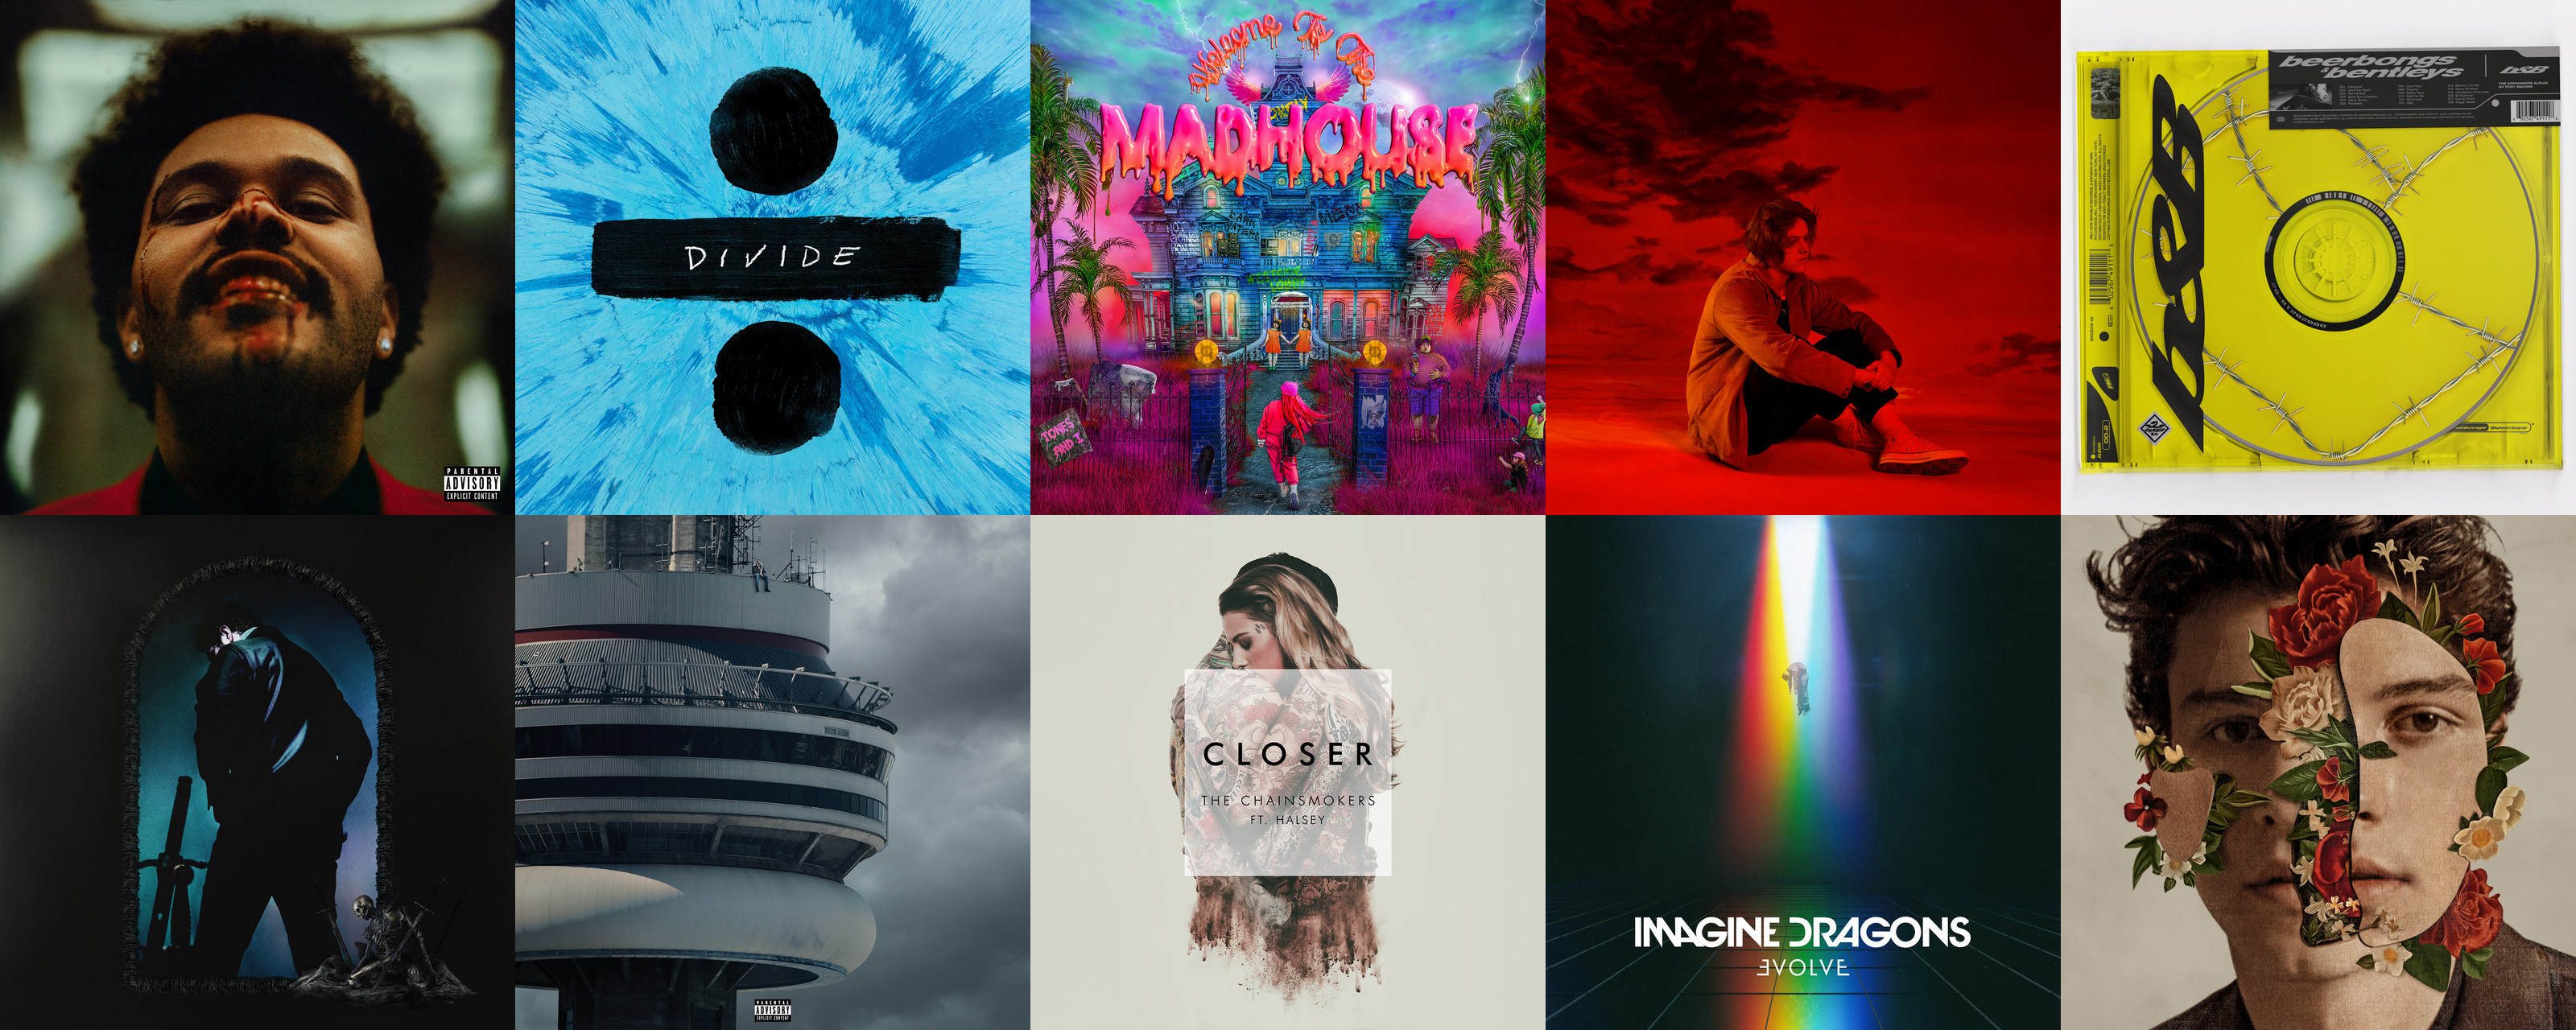 Top 10 most-streamed songs on Spotify – the all-time most popular tracks 2023